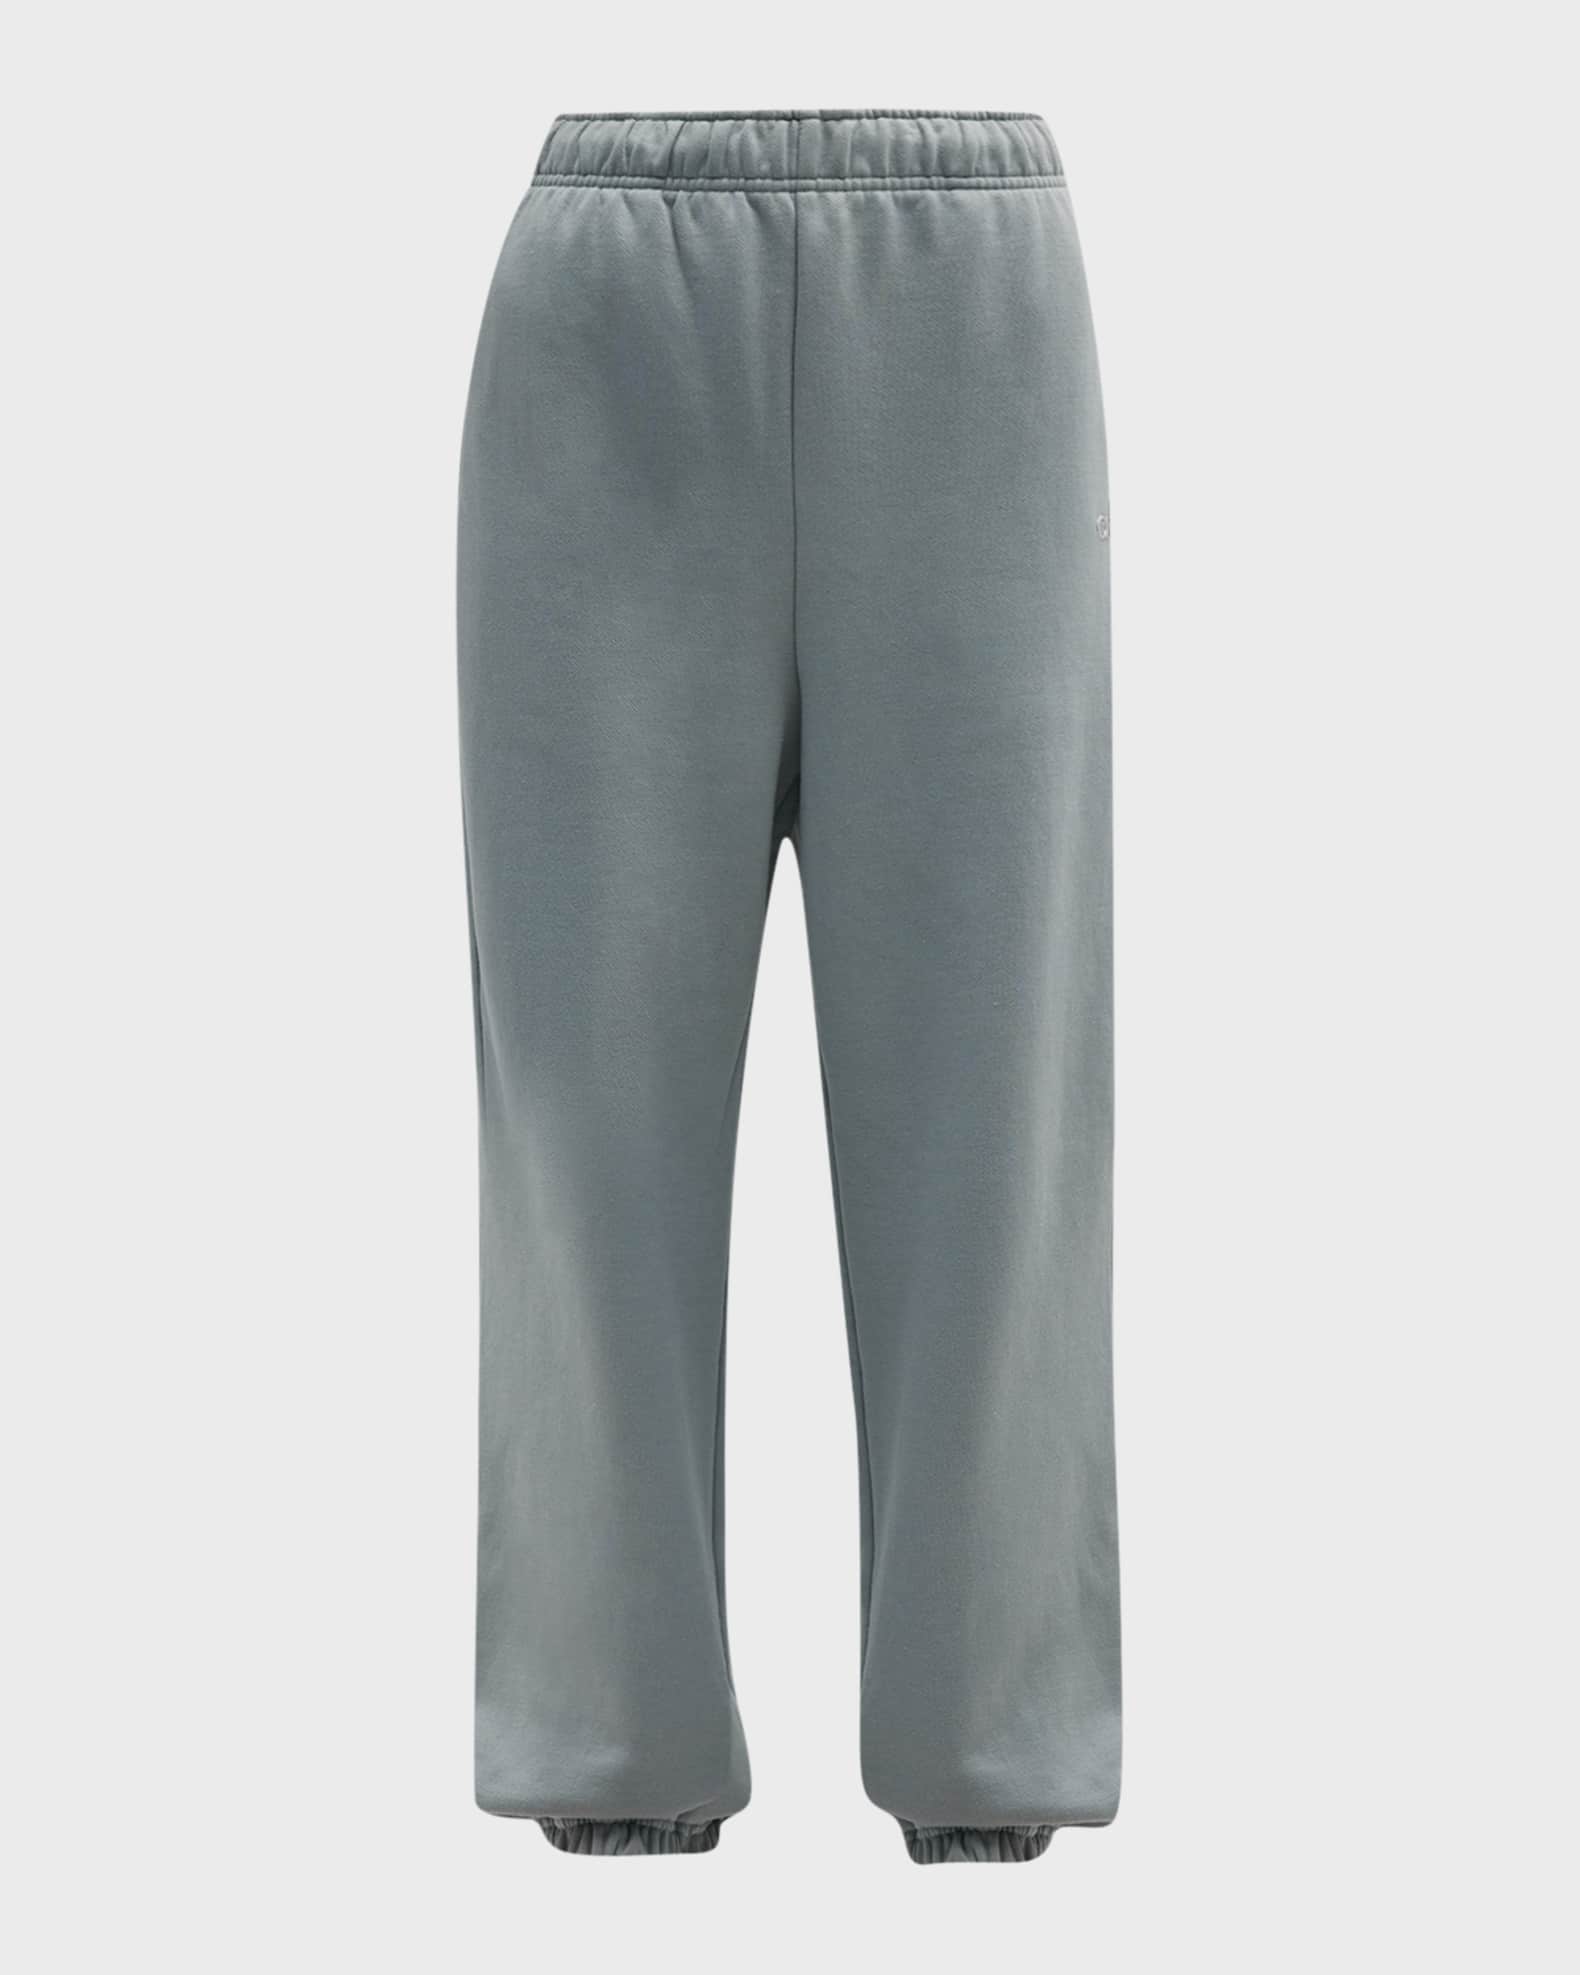 Alo yoga accolade sweatpants in cranberry burgundy. Worn 1 time